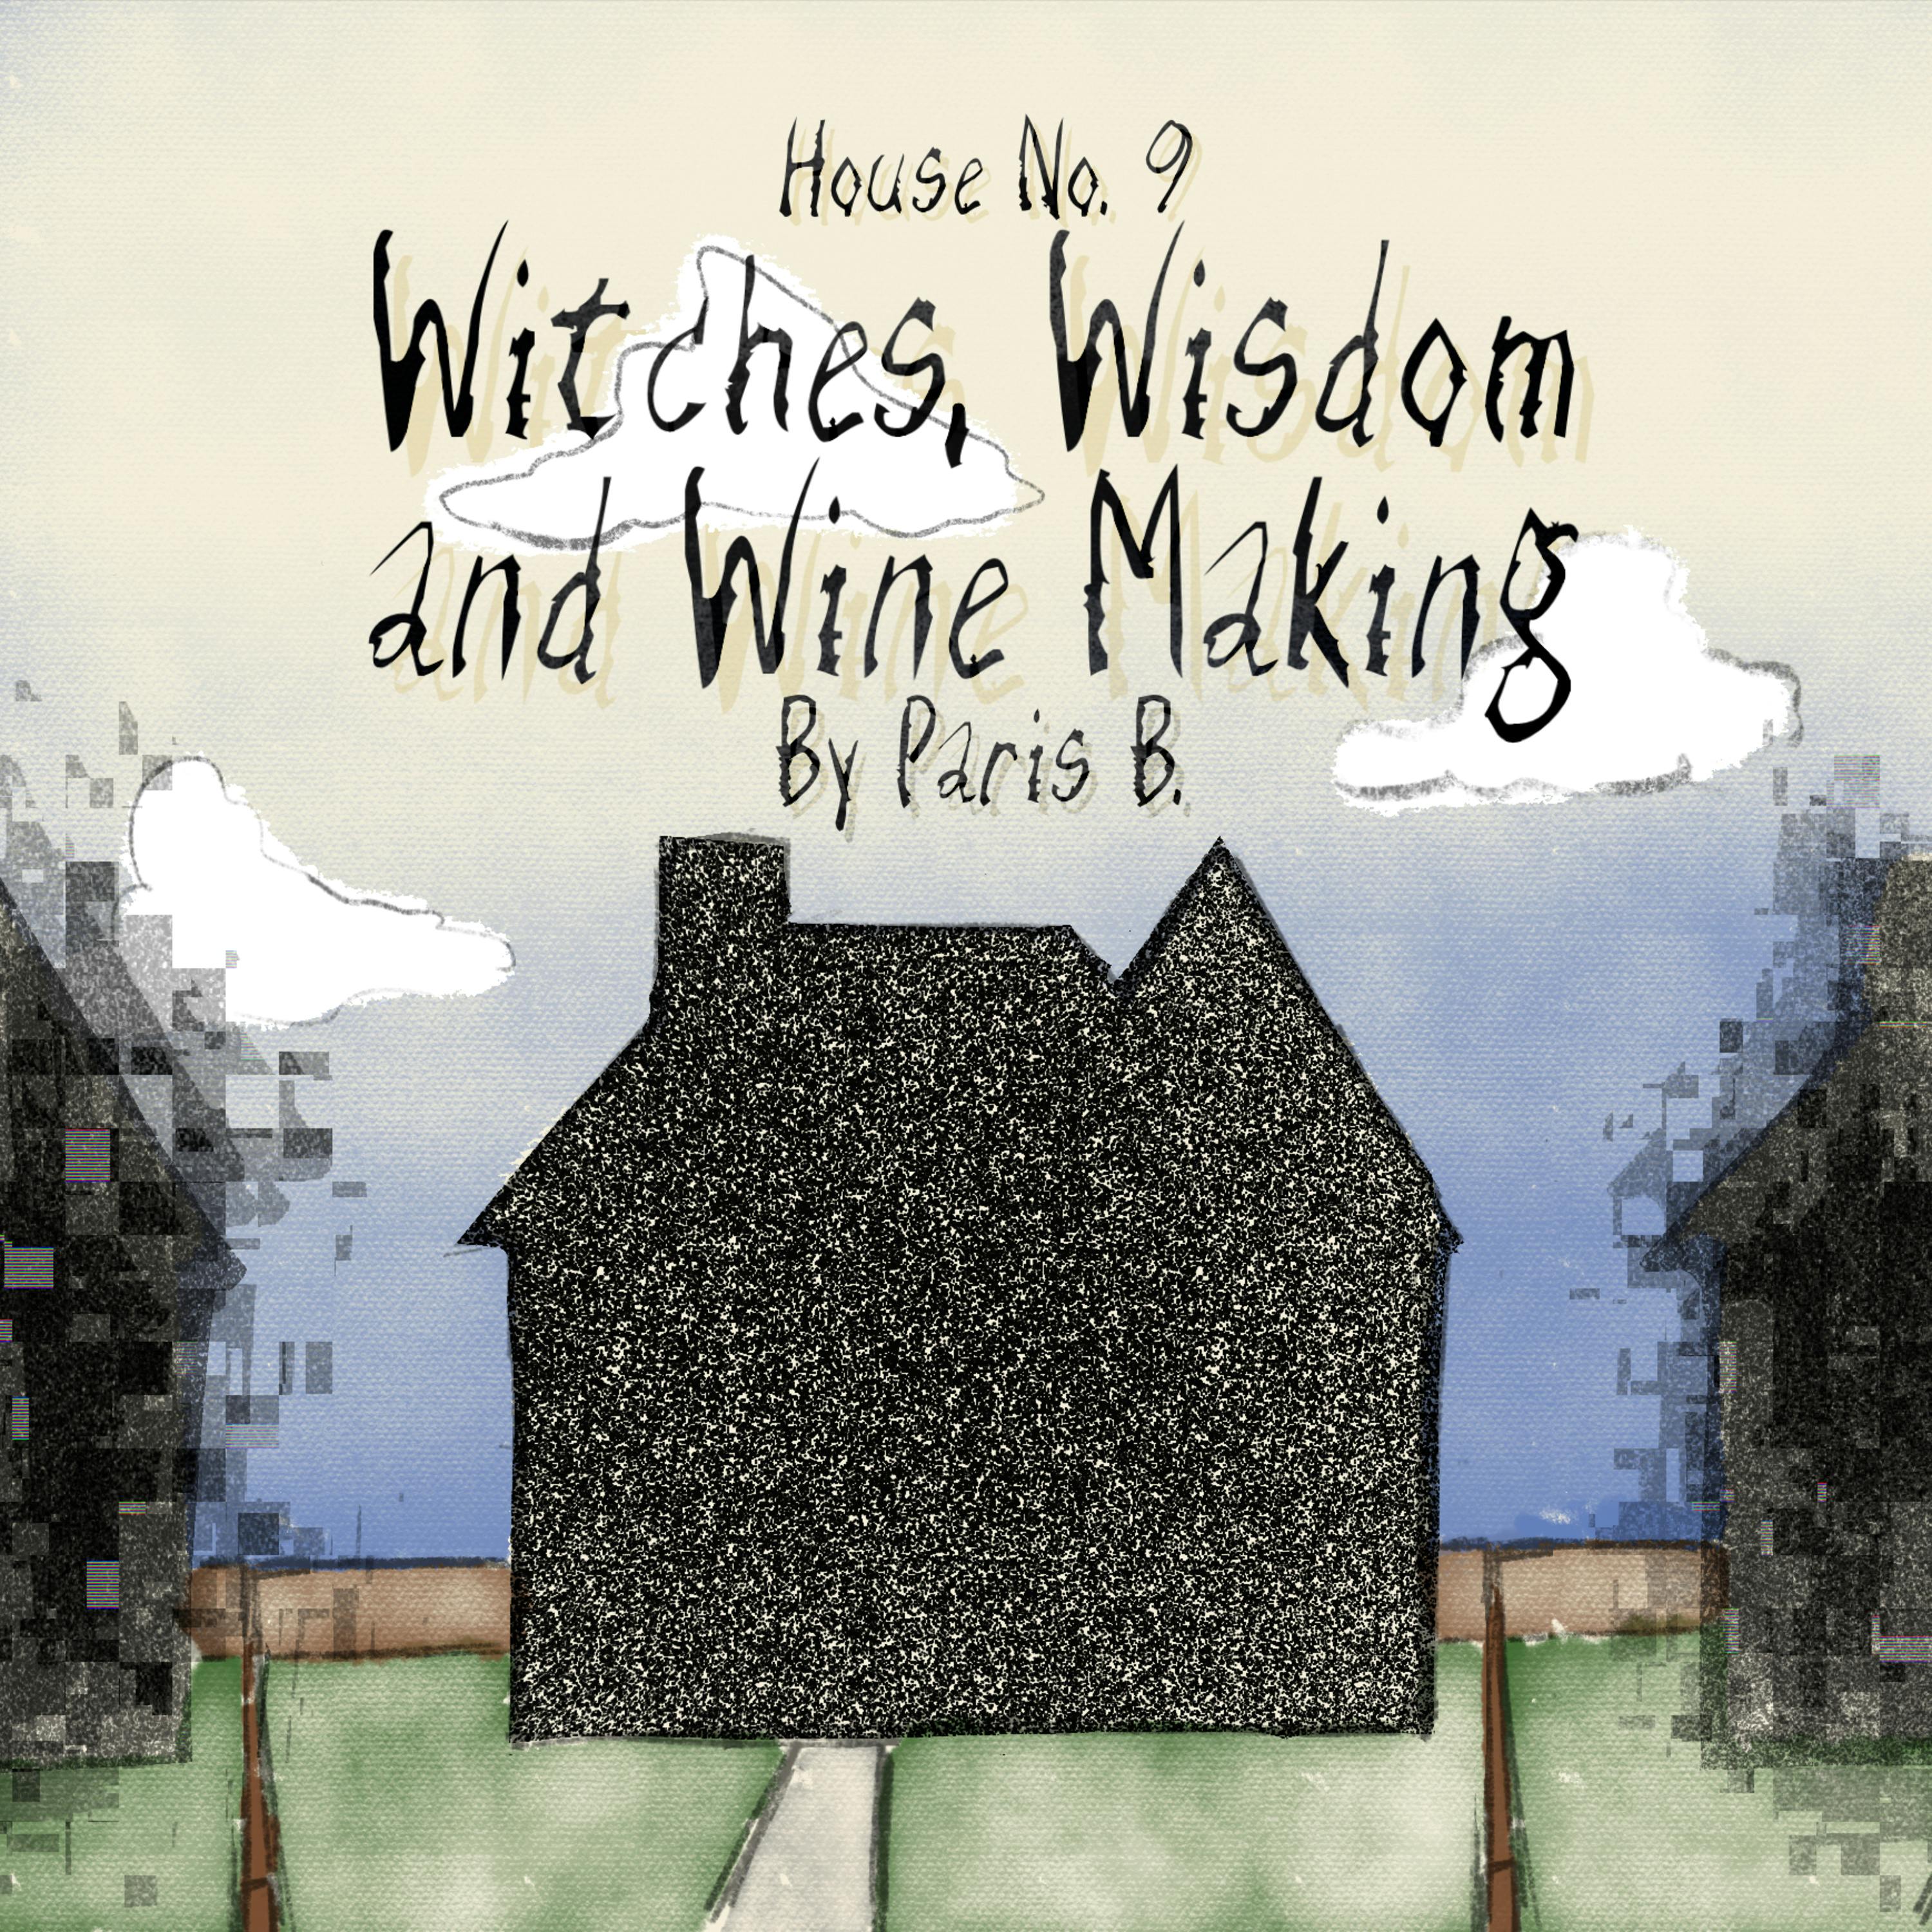 House No. 9: Witches, Wisdom, and Wine Making